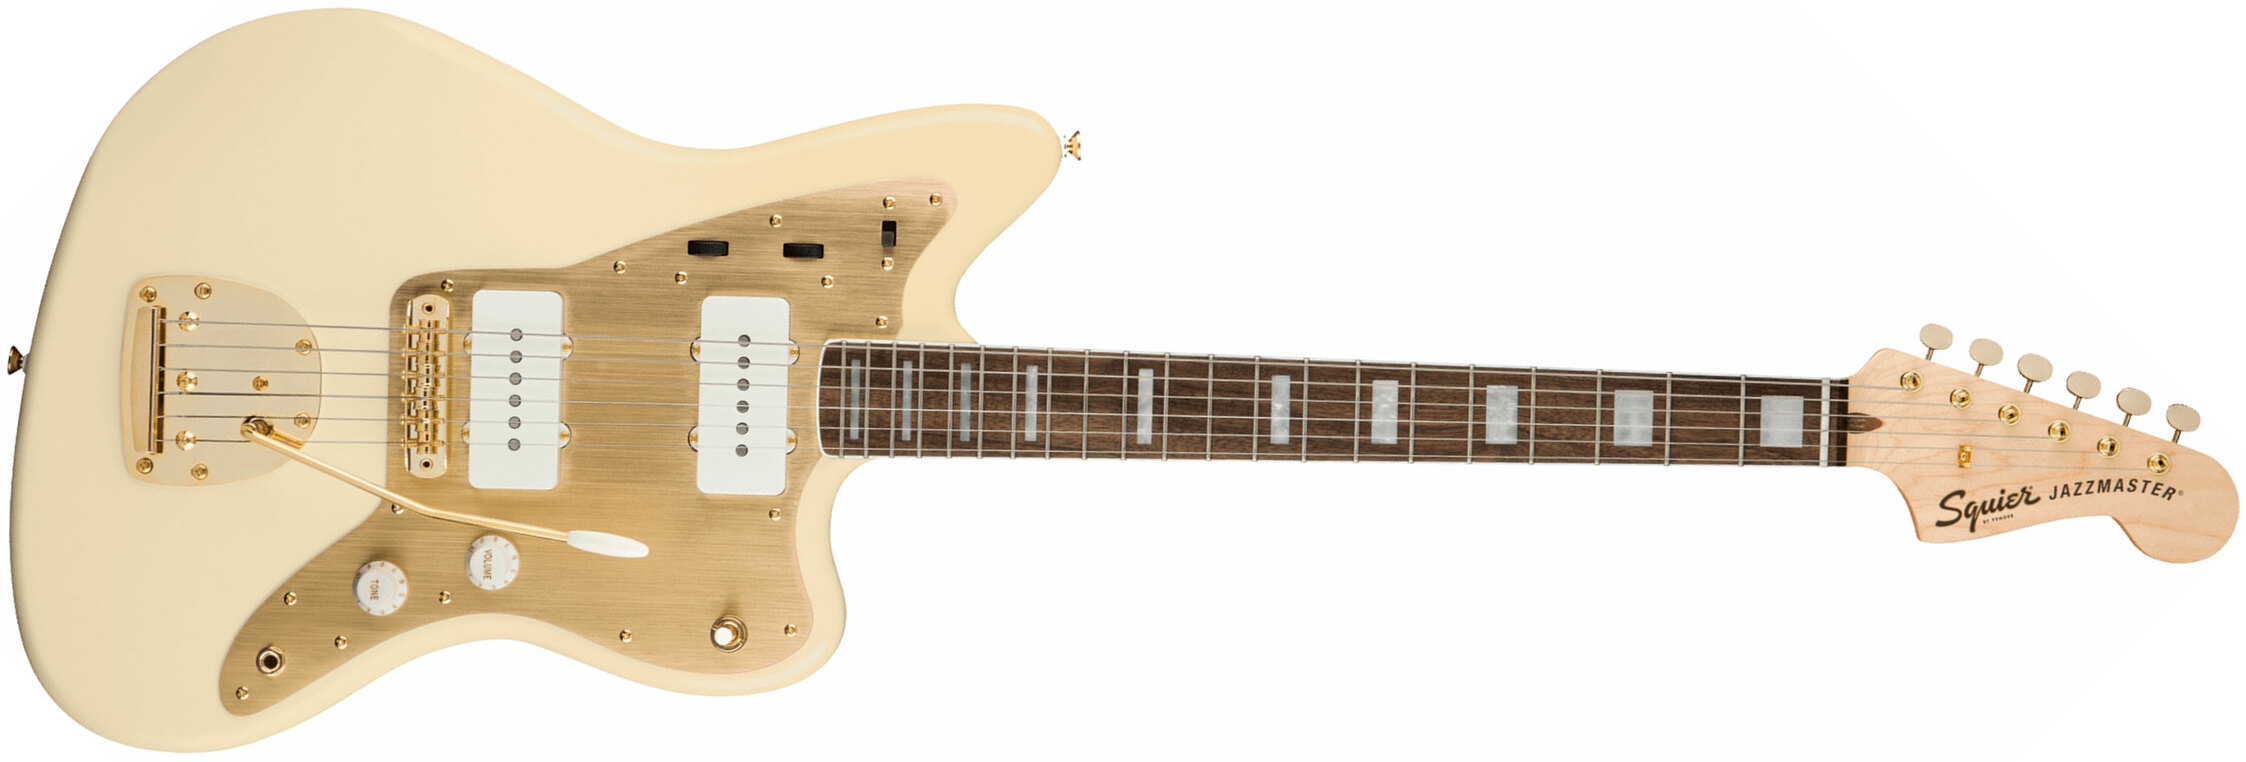 Squier Jazzmaster 40th Anniversary Gold Edition Lau - Olympic White - Retro rock electric guitar - Main picture